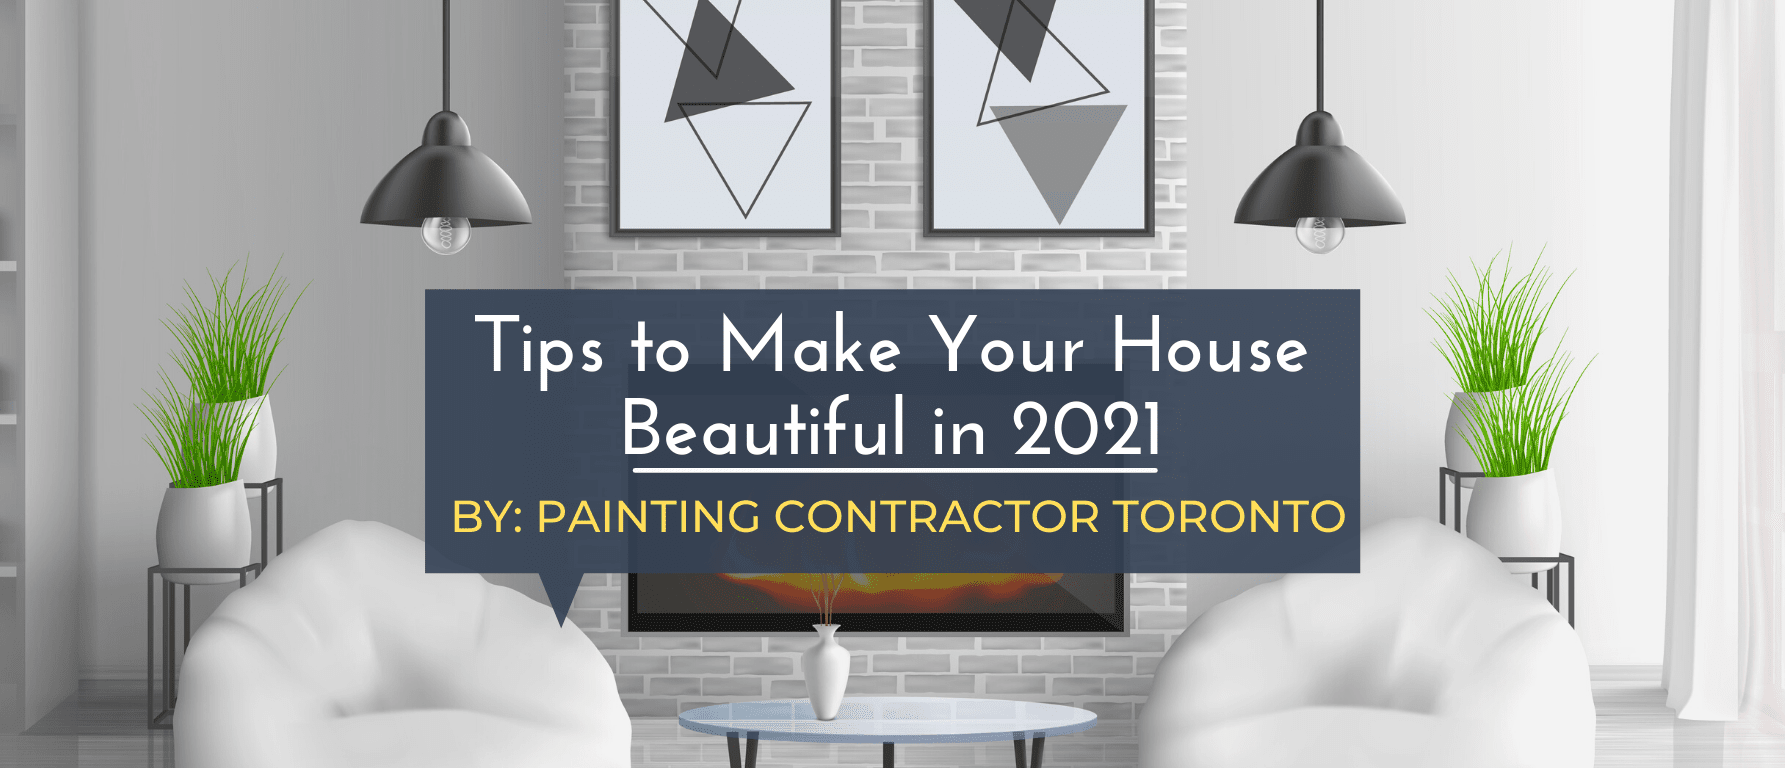 home decoration tips by mascons toronto